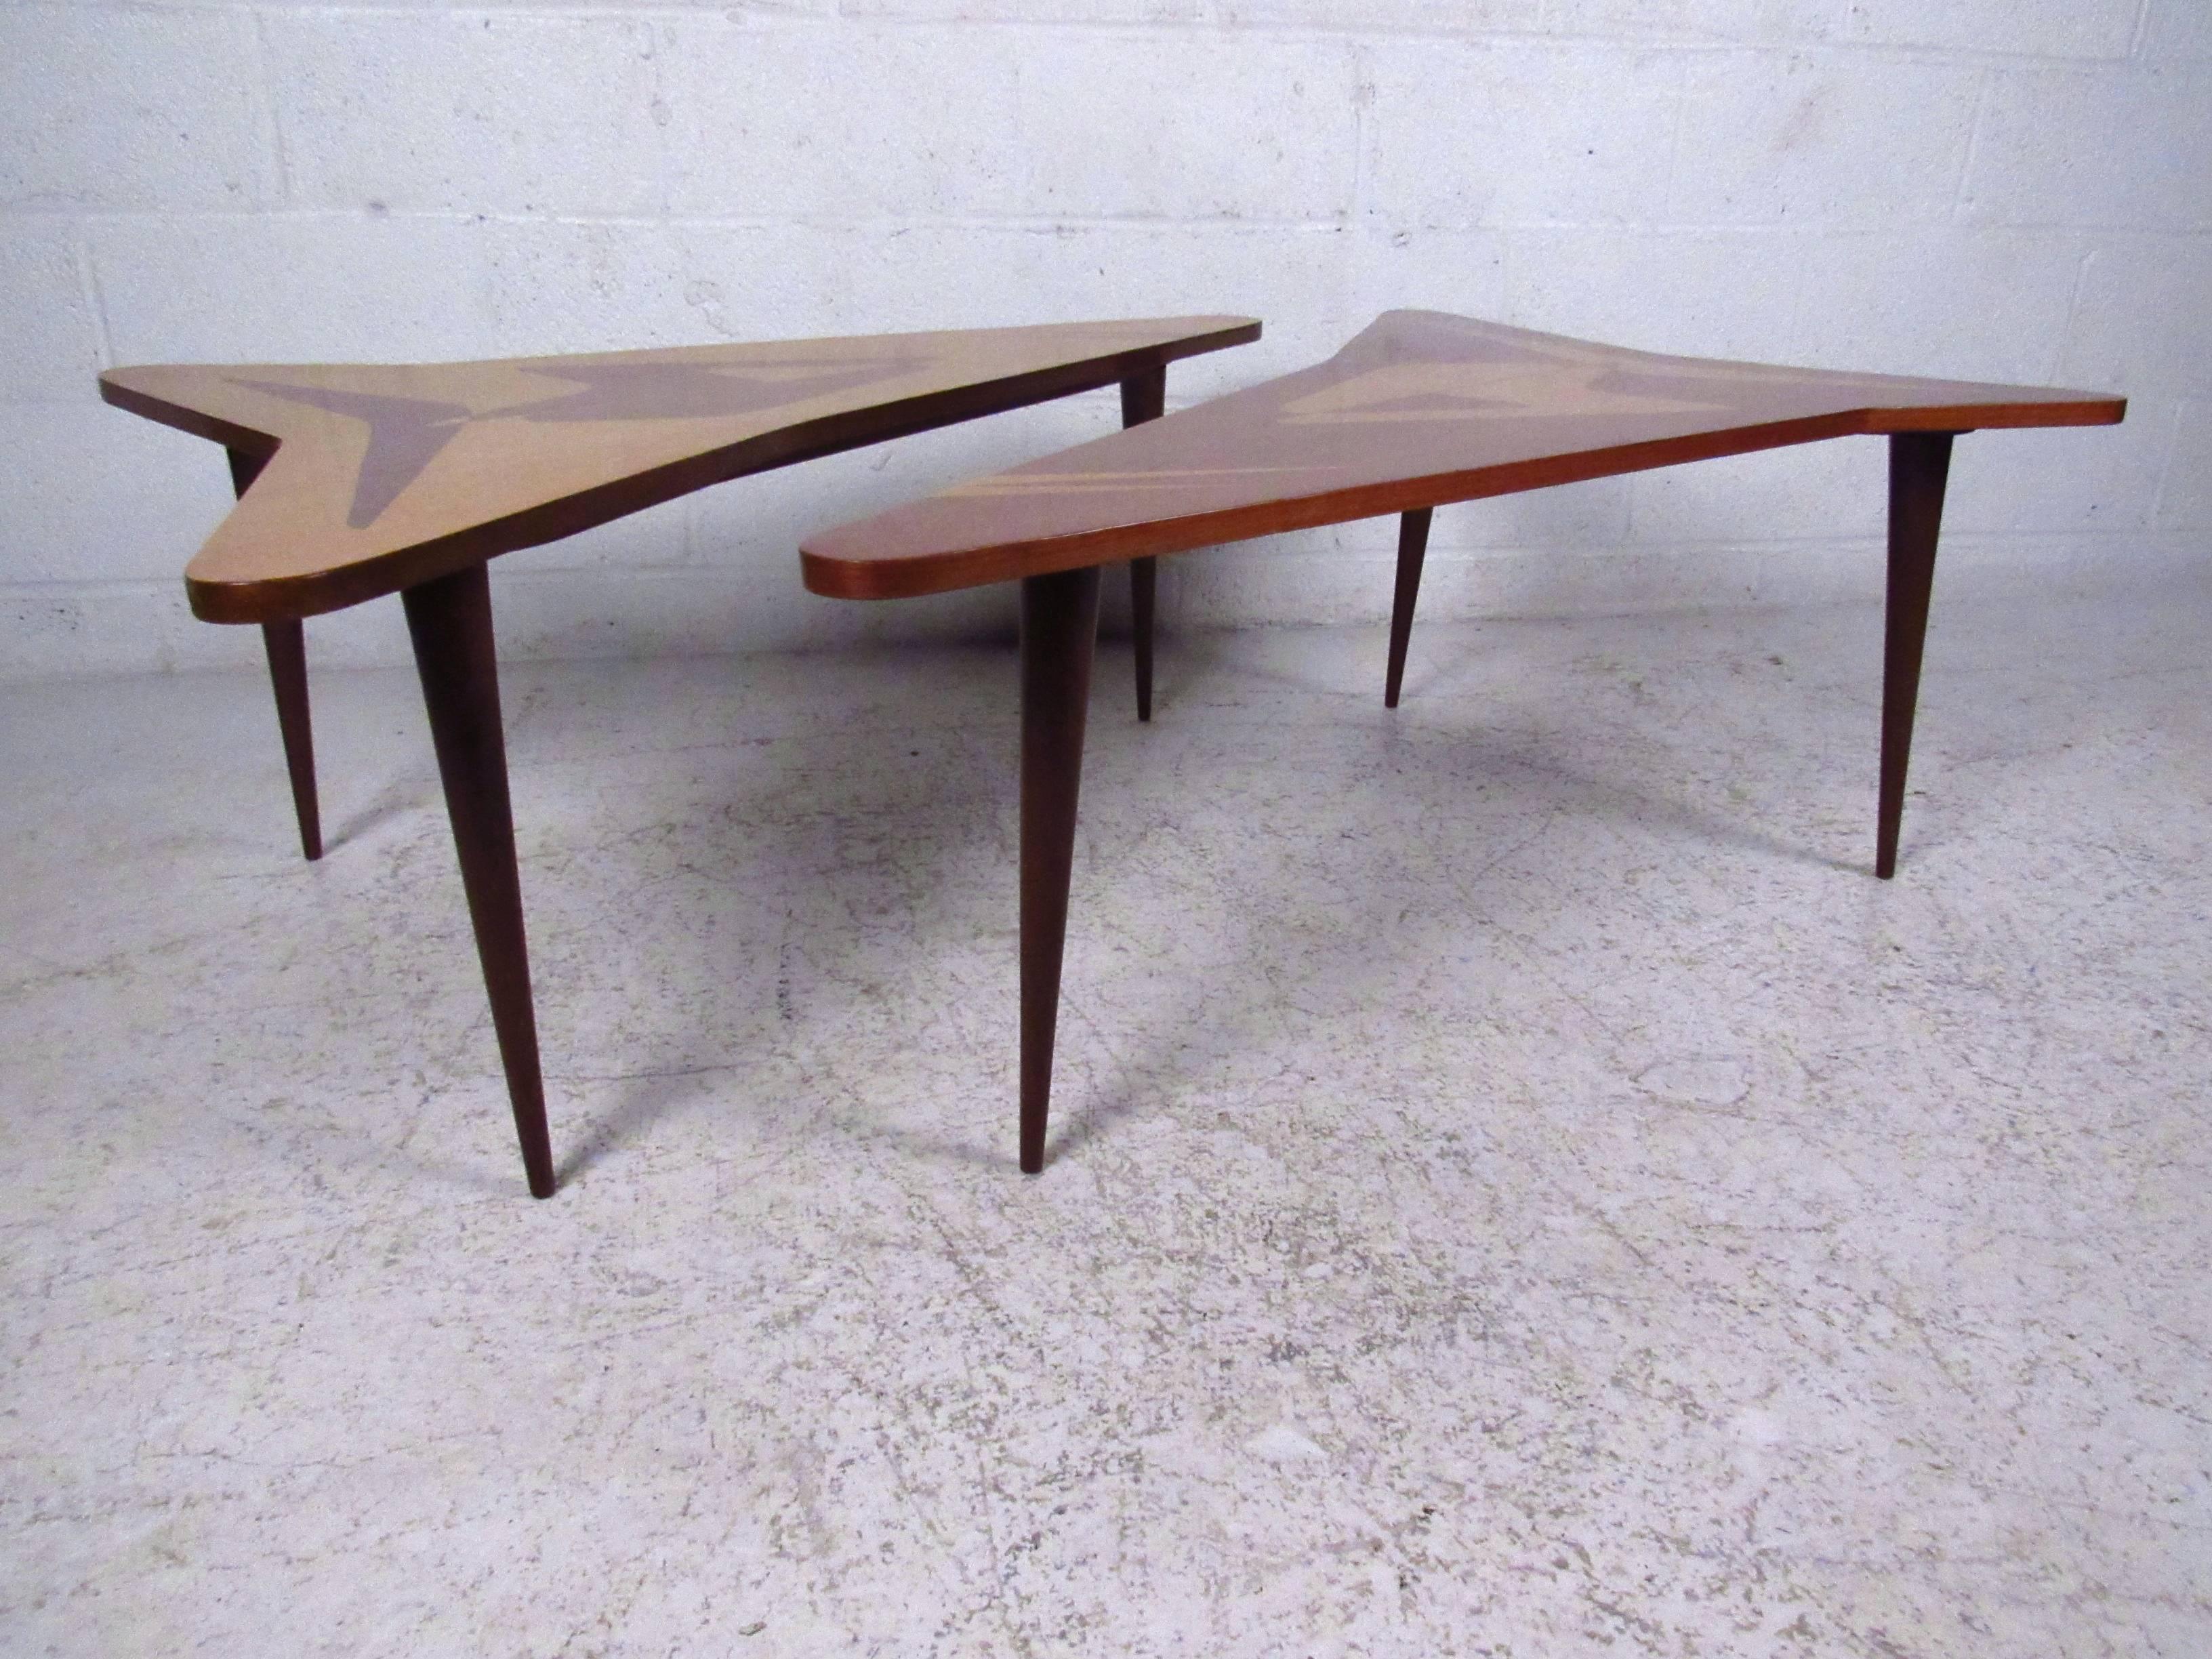 This unique sculptural coffee table features unique shape, quality construction, and elegant marquetry inlay. Tapered legs and Italian style make this a wonderful mid-century addition to any interior. Price is for one table, please confirm which of